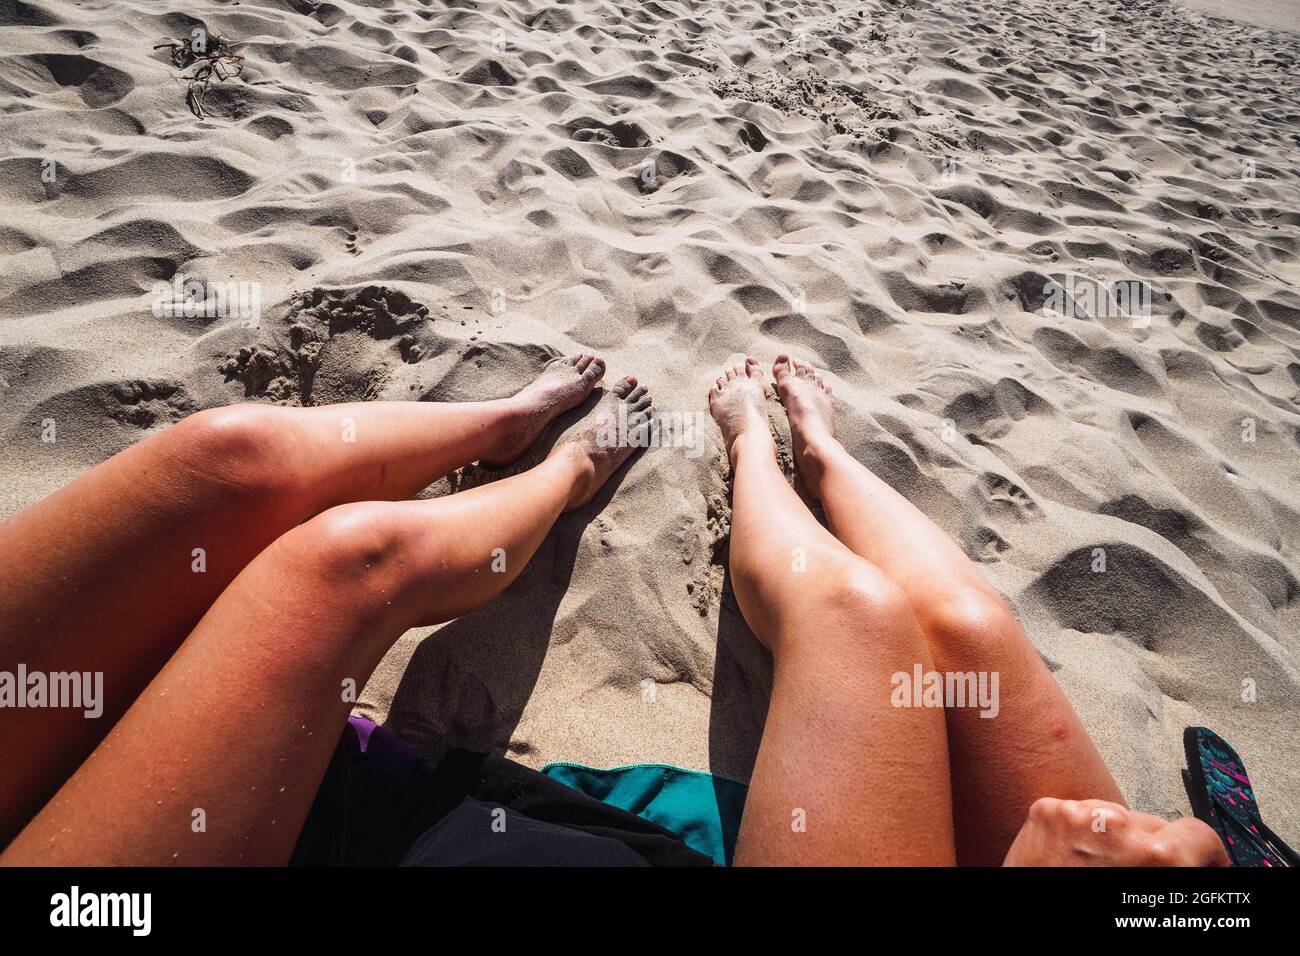 two pair of women's legs in the sand on the beach Stock Photo